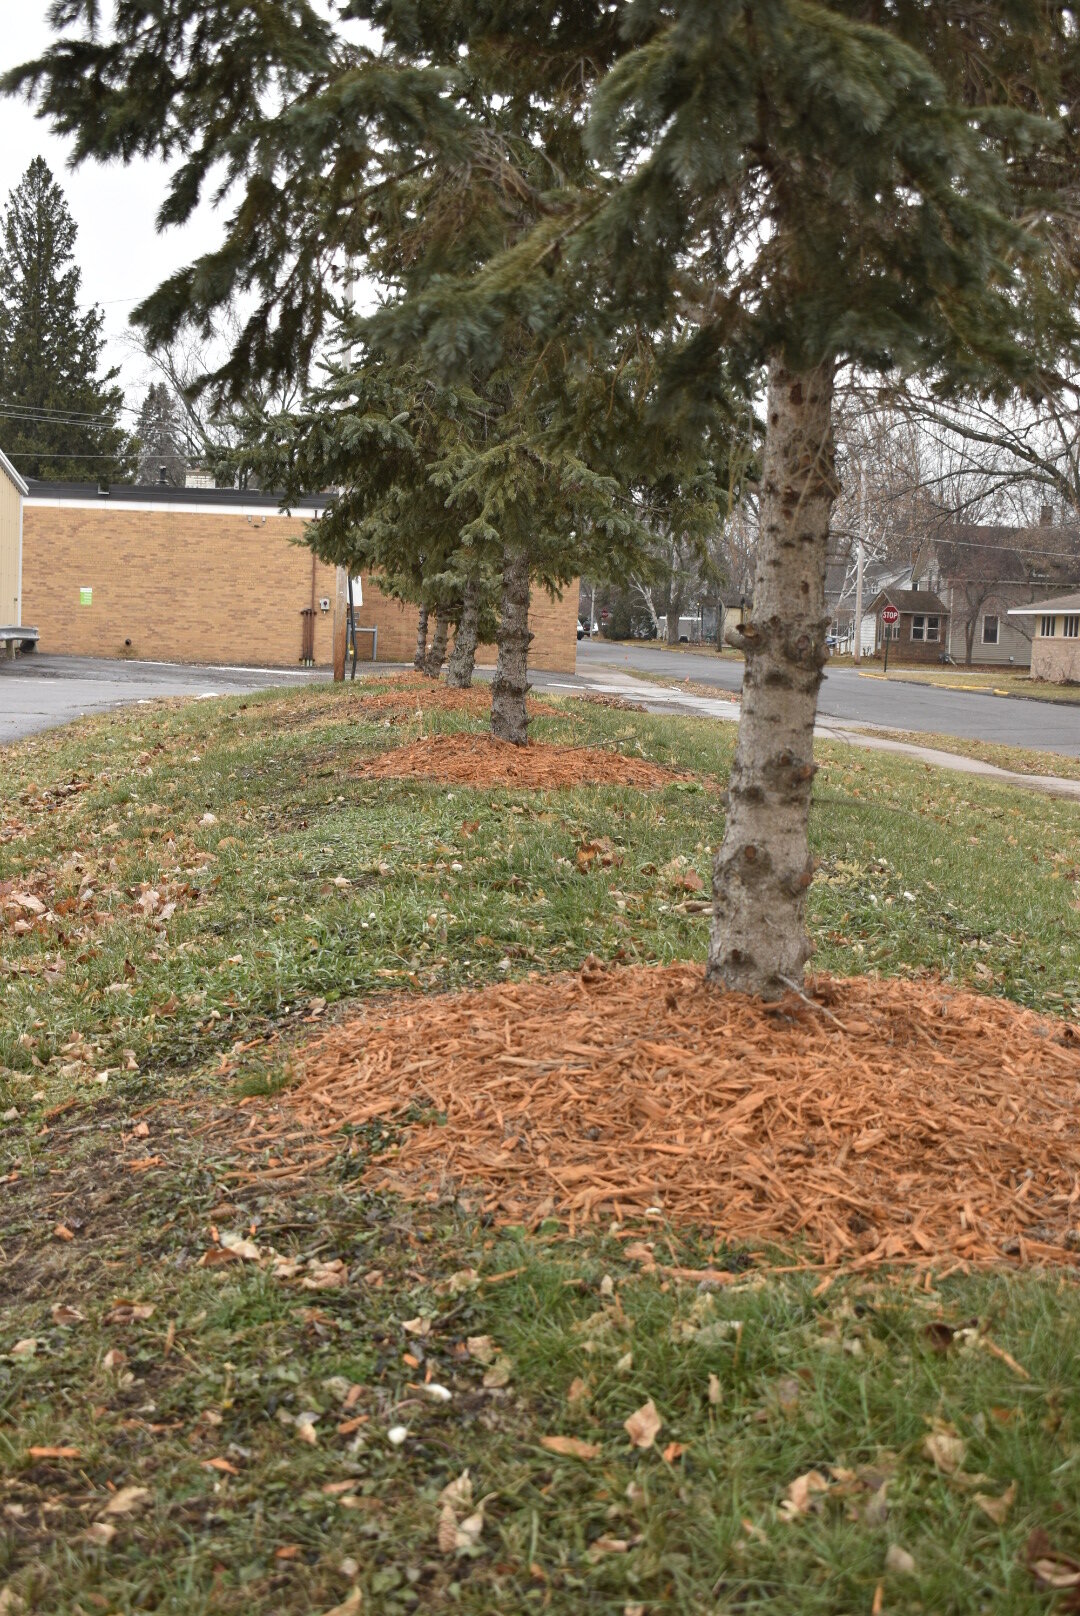 This is an example of mulch mounds around trees covering the stems, preventing proper oxygen from reaching the roots.

Mulch mounds can harm the growth and health of trees as they prevent the roots from receiving proper oxygen supply. The roots of a 